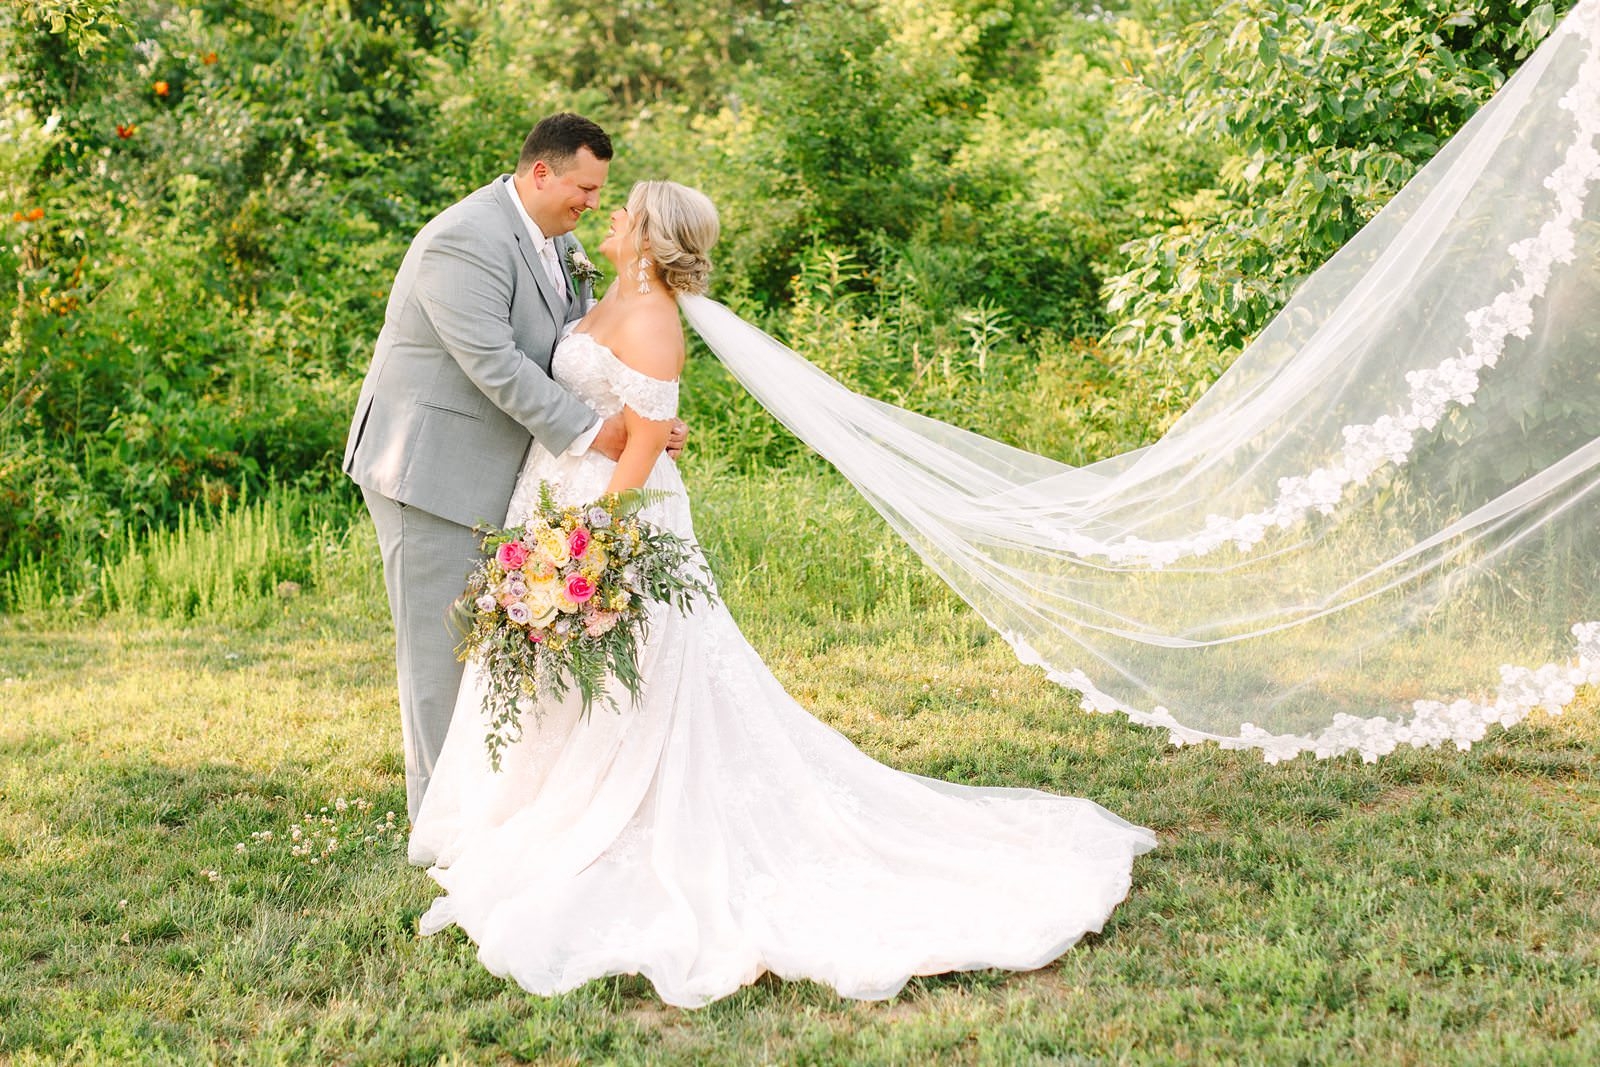 A Sunny Summer Wedding at Friedman Park in Newburgh Indiana | Paige and Dylan | Bret and Brandie Photography157.jpg